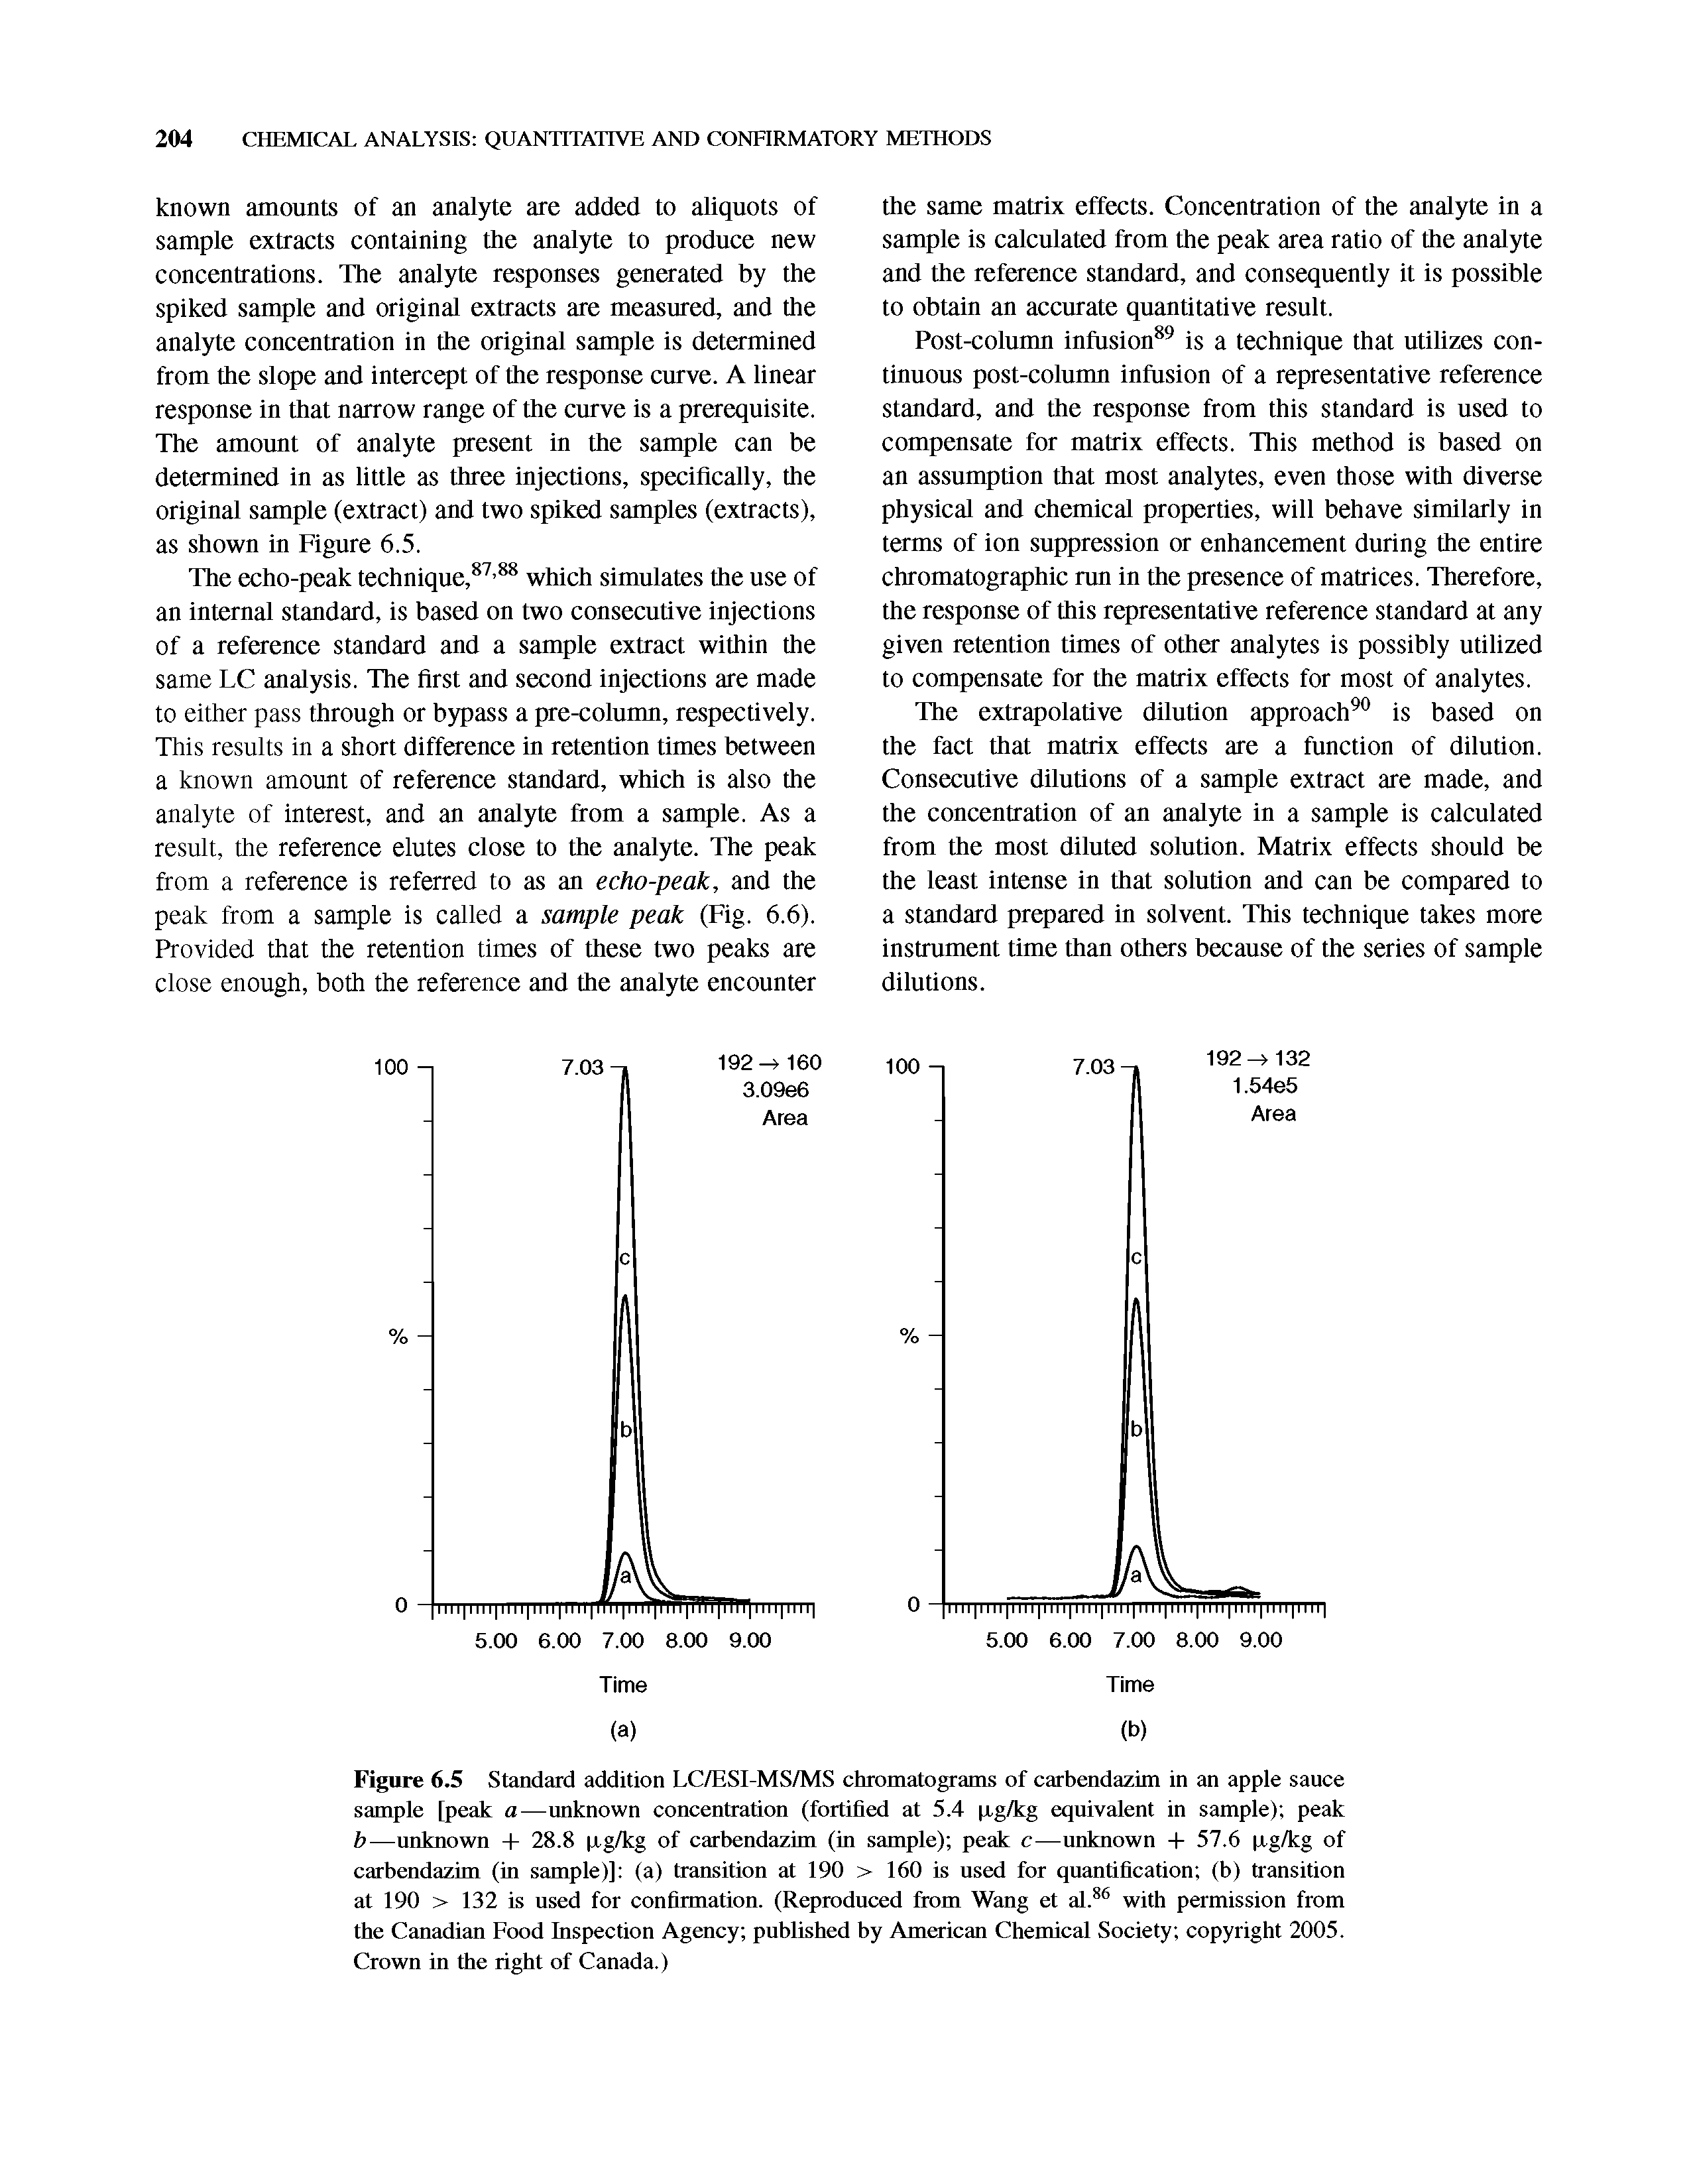 Figure 6.5 Standard addition LC/ESI-MS/MS chromatograms of carbendazim in an apple sauce sample [peak a—unknown concentration (fortified at 5.4 p.g/kg equivalent in sample) peak b—unknown - - 28.8 irg/kg of carbendazim (in sample) peak c—unknown - - 57.6 irg/kg of carbendazim (in sample)] (a) transition at 190 > 160 is used for quantification (b) transition at 190 > 132 is used for confirmation. (Reproduced from Wang et al. with permission from the Canadian Food Inspection Agency published by American Chemical Society copyright 2005. Crown in the right of Canada.)...